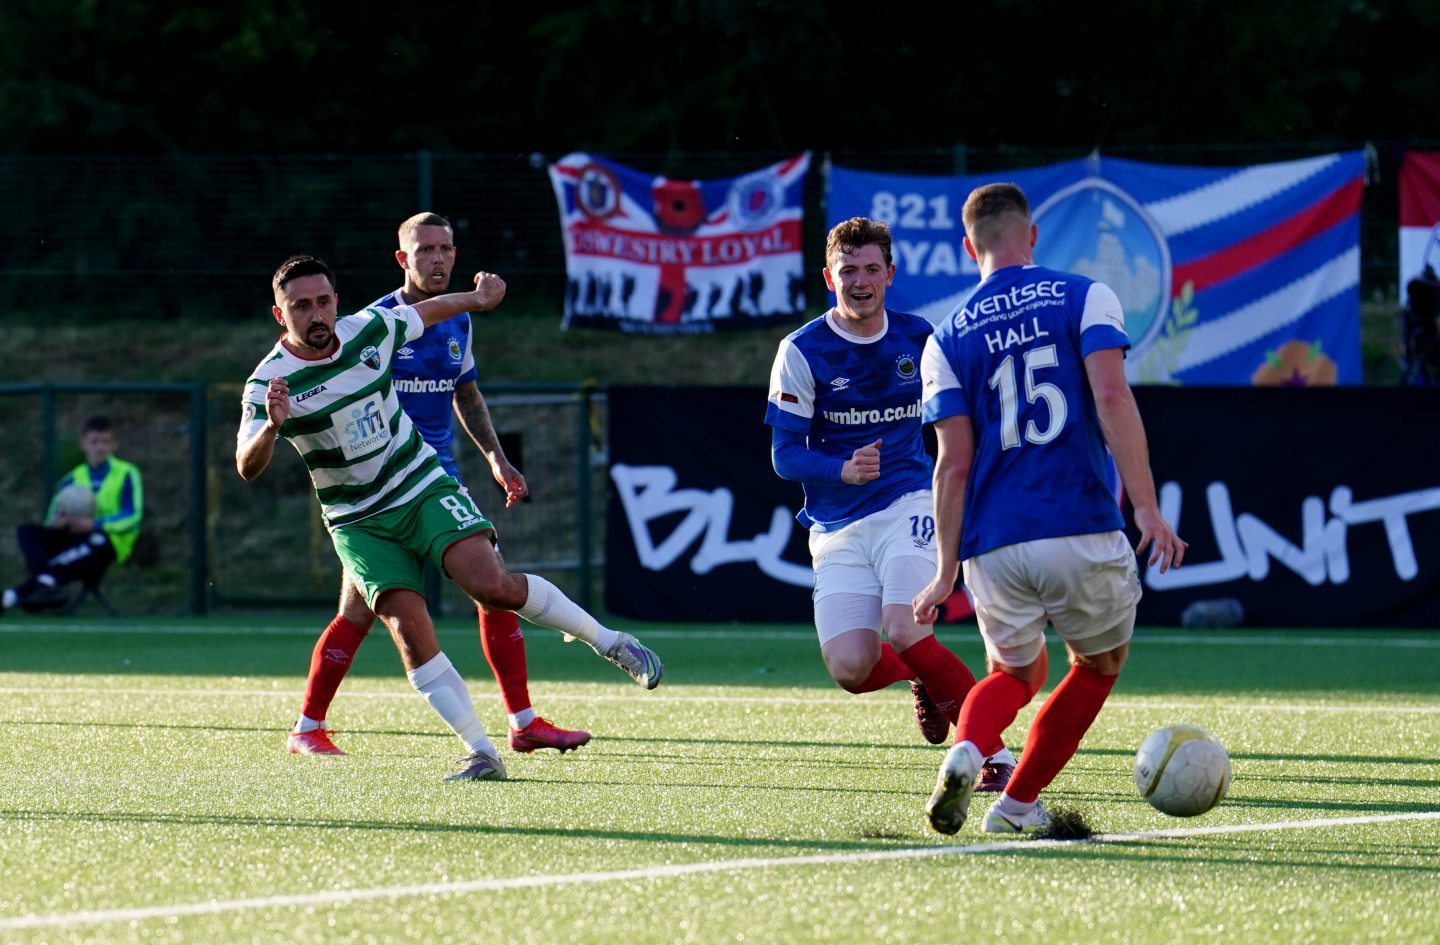 The New Saints' Ryan Brobbel scores against Linfield in their Champions League first qualifying round match in July.